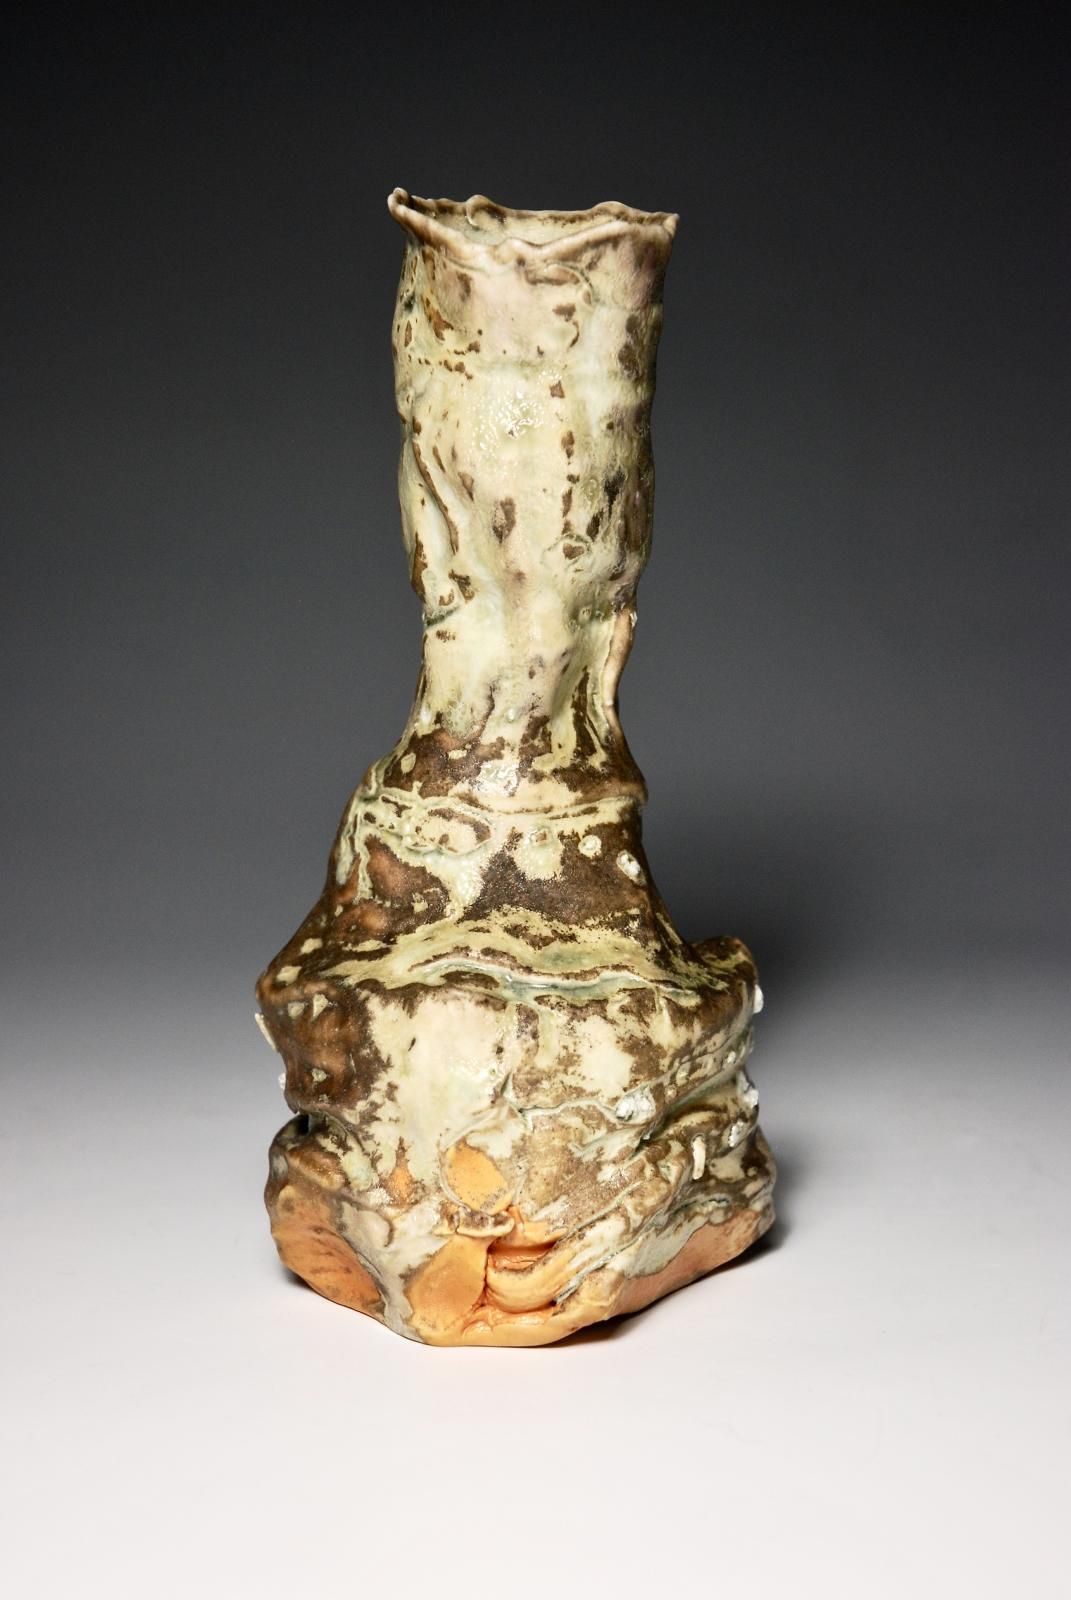 PourerIndividual, slow thrown in 2 parts, hand  assembled and manipulated, with a trimmed foot. Porcelain Body with local sourced indigenous rock grits.Celadon glaze with varying ash patternation.Fired in the middle zones of small Anagama kiln in a 72 hr firing to 1320C. Reduction Cooled by Sim Taylor